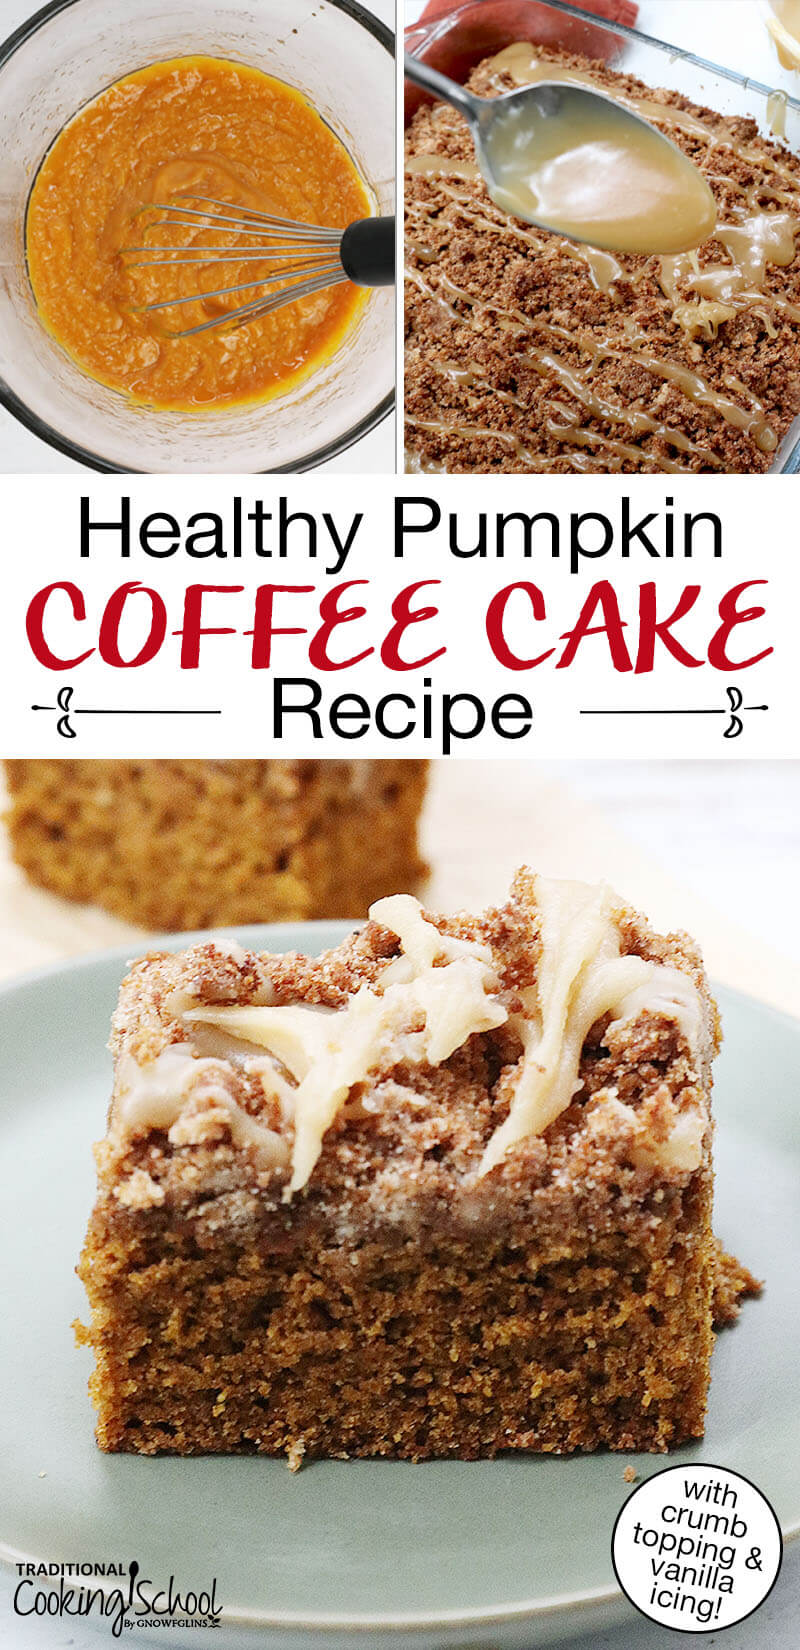 Photo collage of coffee cake: a whisk mixing together ingredients in a bowl, drizzling cake with vanilla icing, and a slice of cake on a plate. Text overlay says: "Healthy Pumpkin Coffee Cake Recipe (with crumb topping & vanilla icing!)"